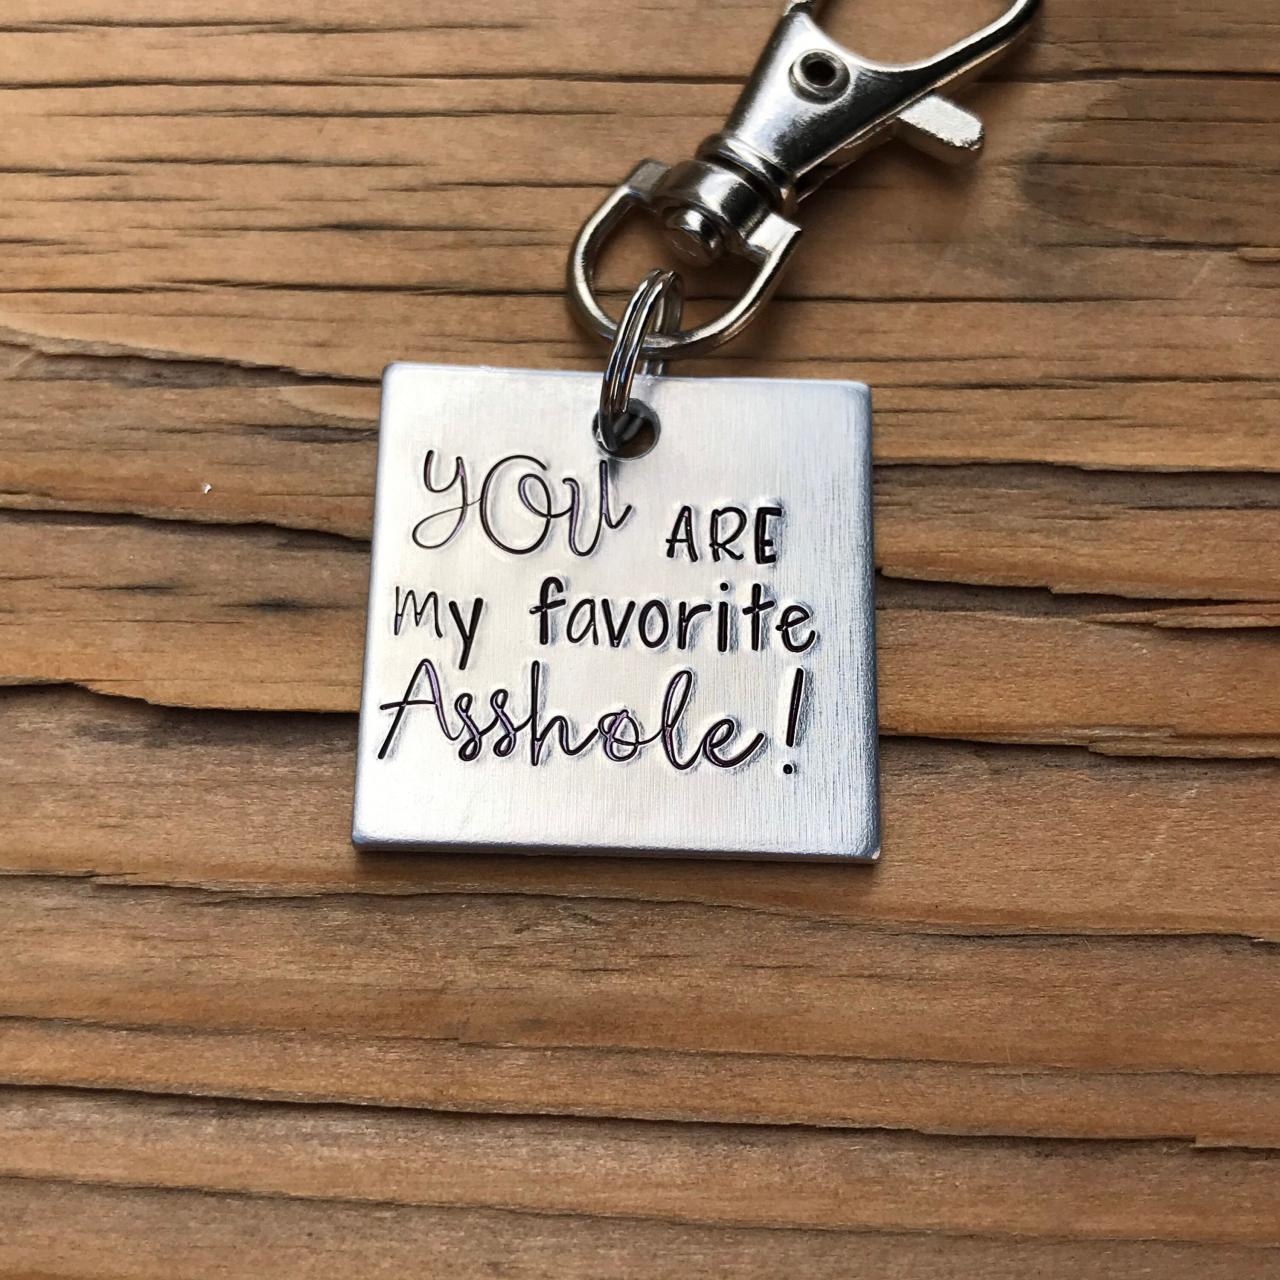 Favorite Asshole Keychain, silver color metal, lightweight, thoughtful gift, wife, husband, son, daughter, dad, brother